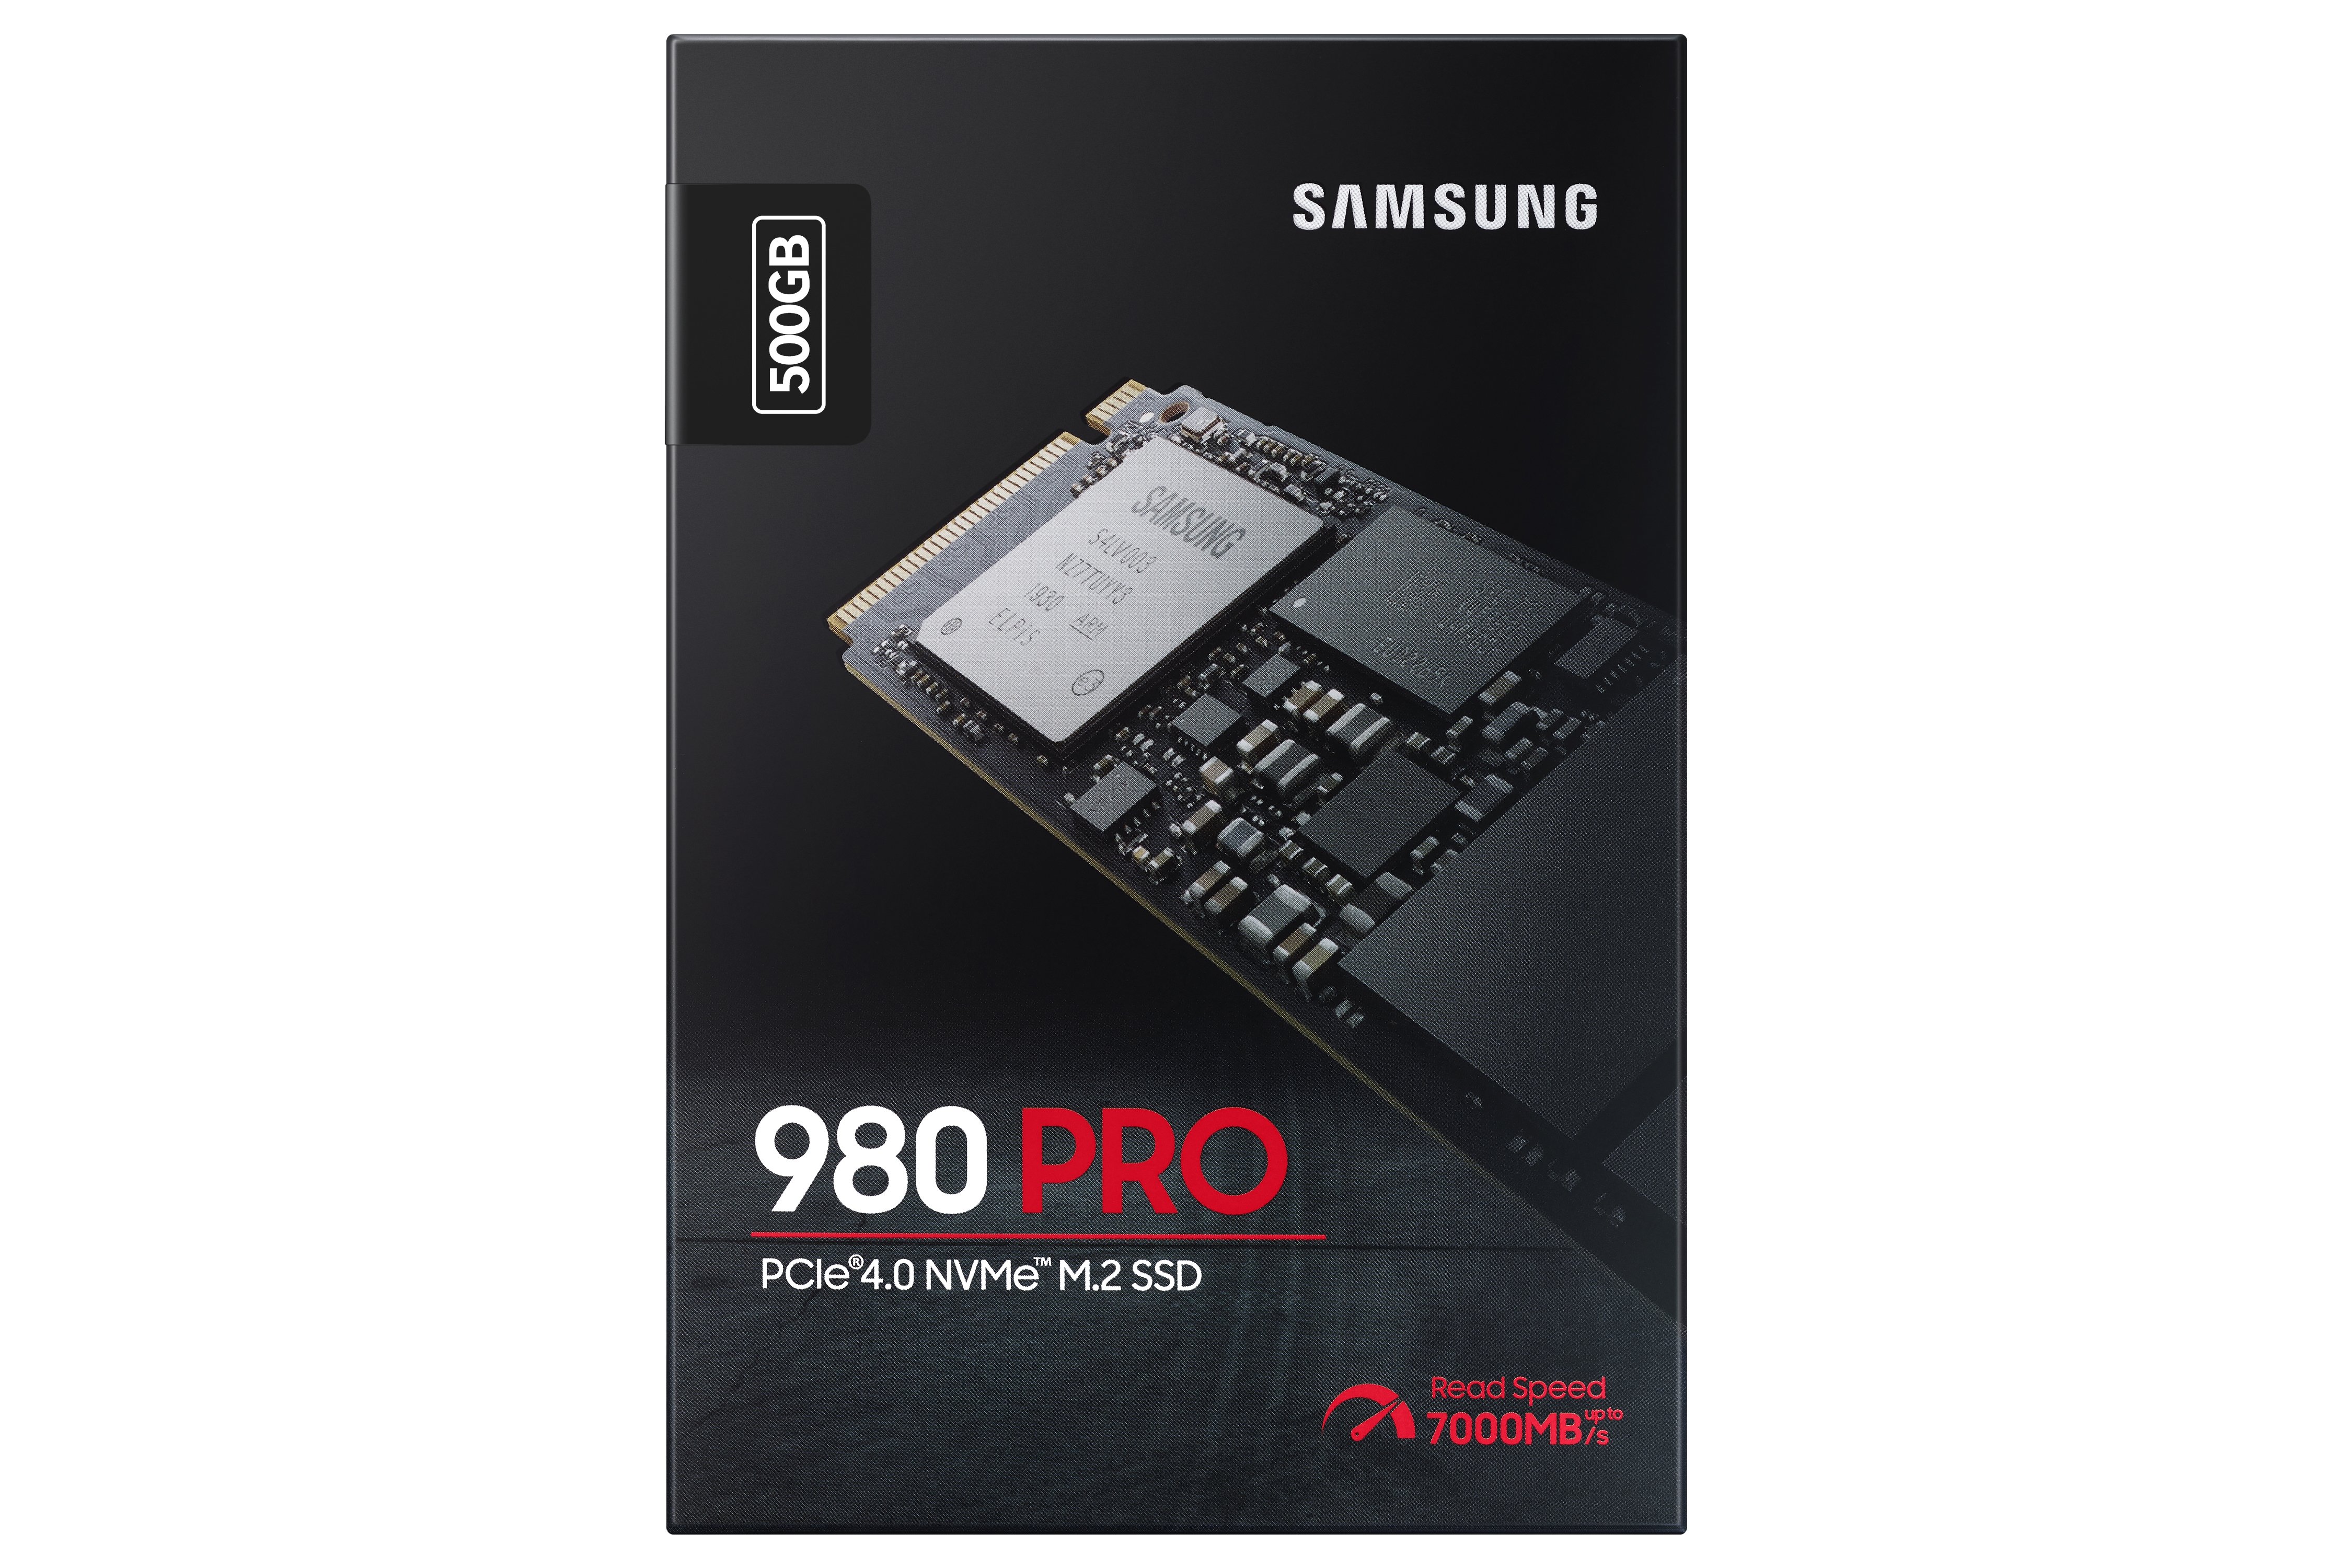 Samsung SSD 980 Review - Fast But Affordable? 